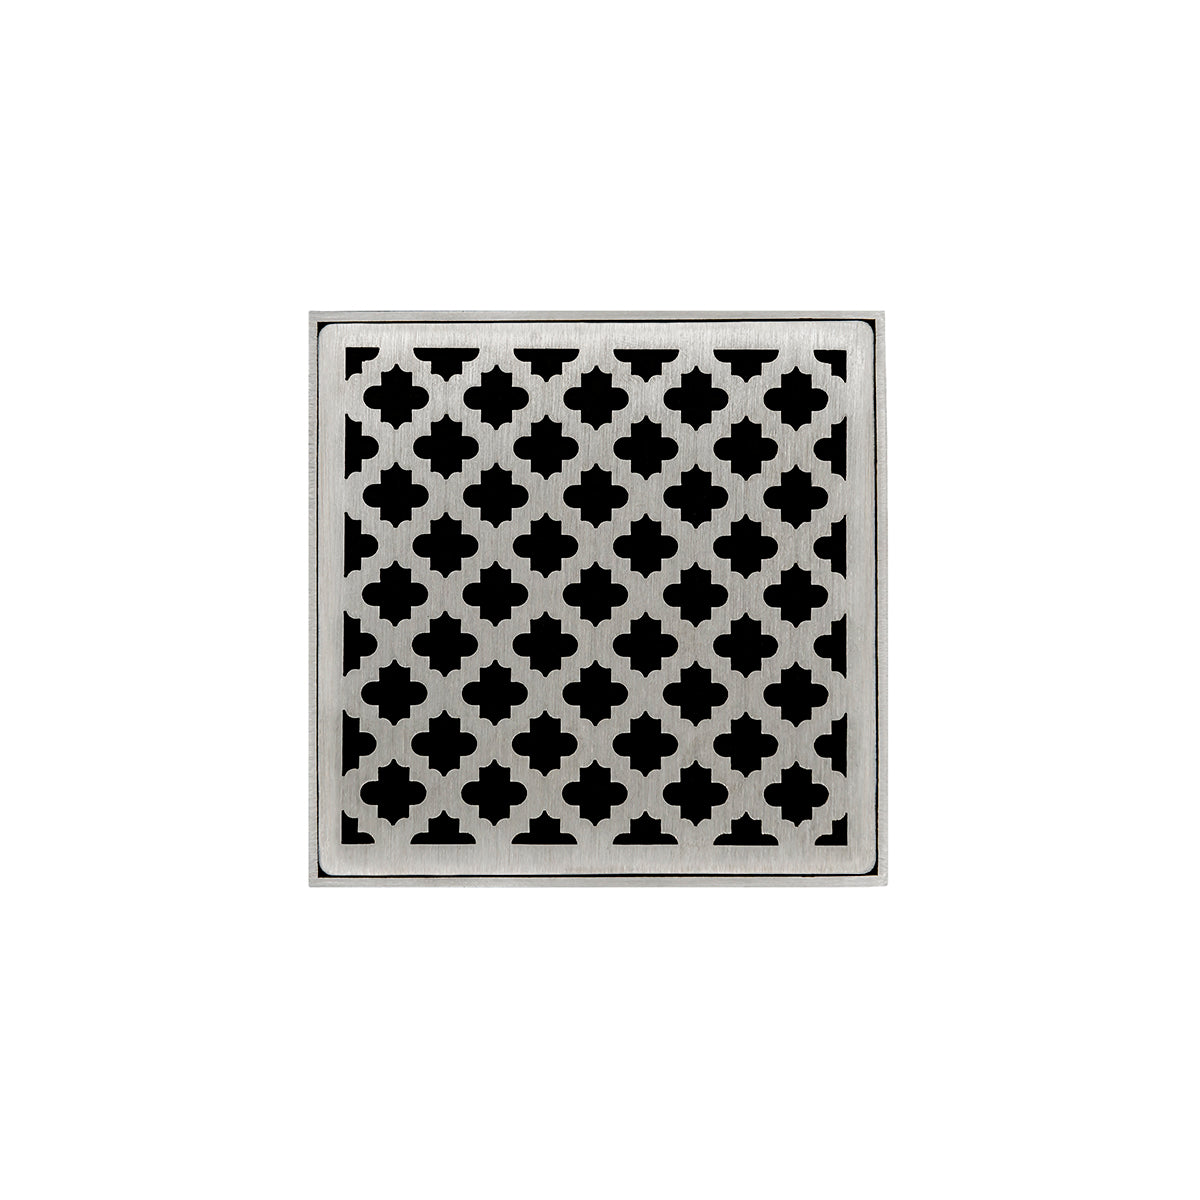 Infinity Drain 5" x 5" MD 5 High Flow Premium Center Drain Kit with Moor Pattern Decorative Plate with Cast Iron Drain Body, 3" No-Hub Outlet